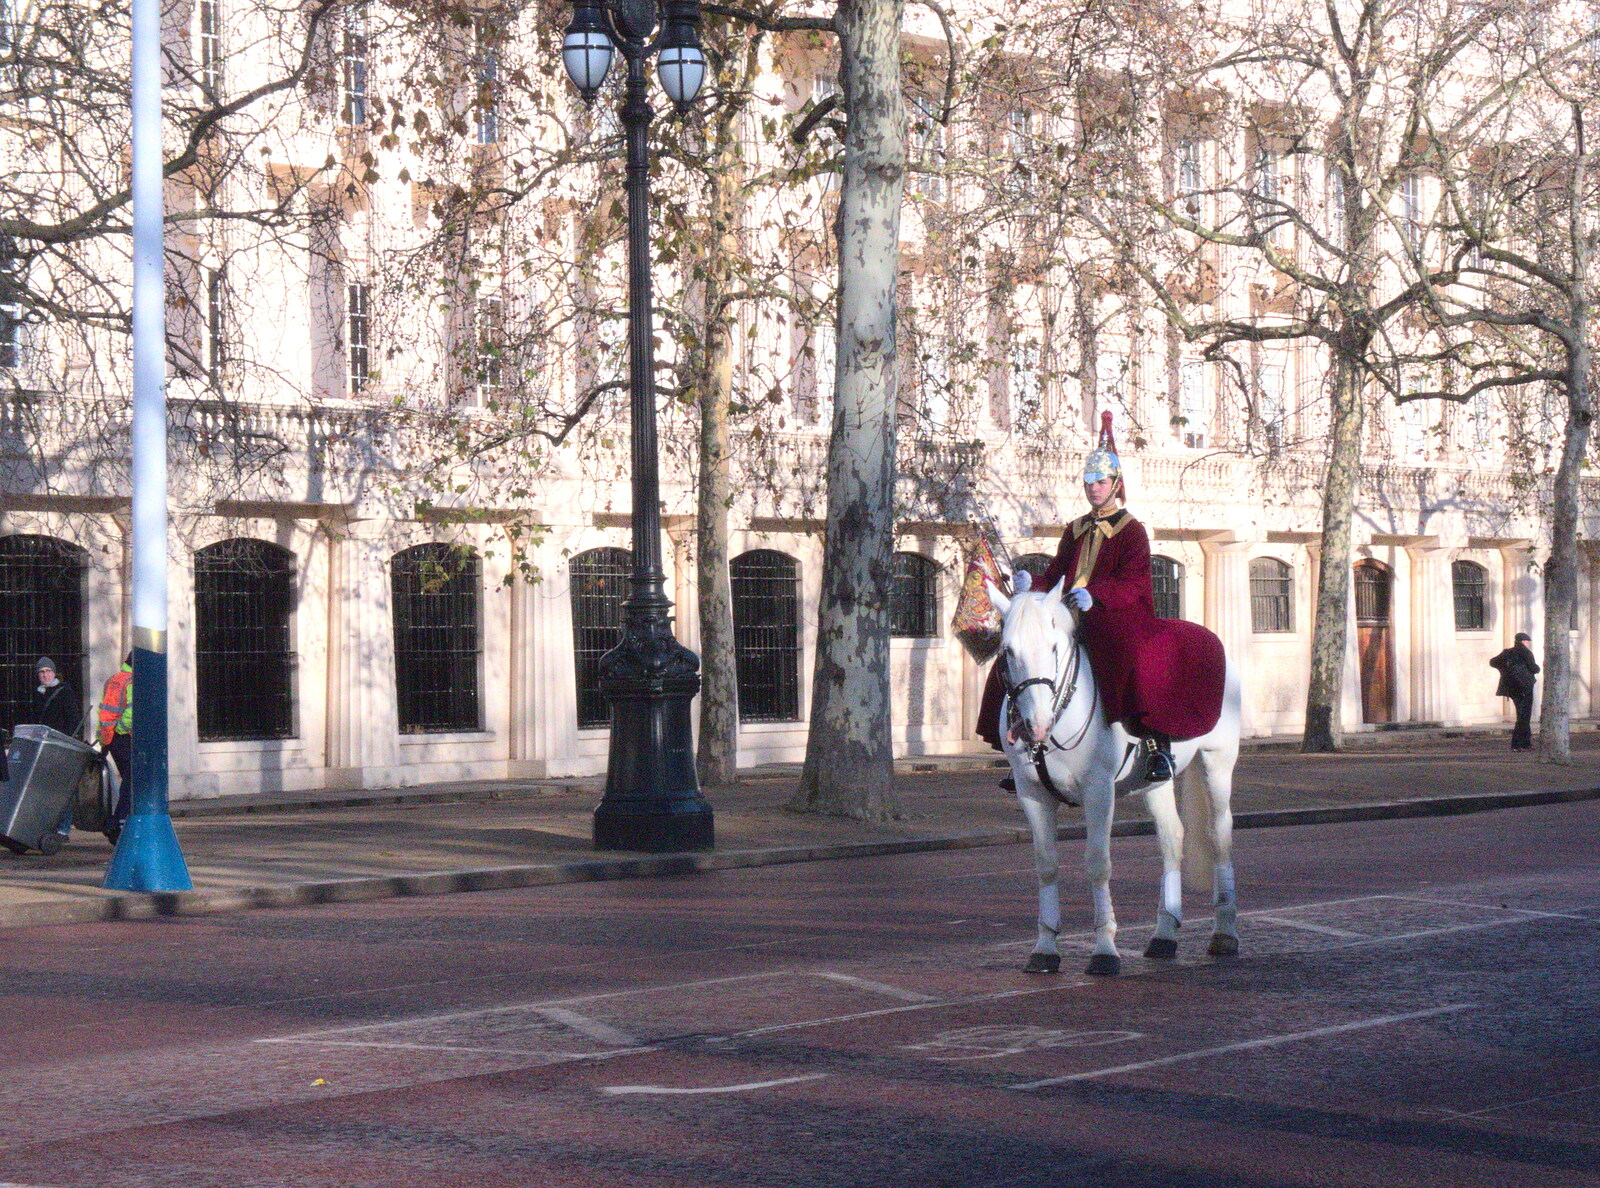 A lone horseman carries the Royal Standard on the Mall from A Work Lunch in Nandos, Bayswater Grove, West London - 20th December 2017